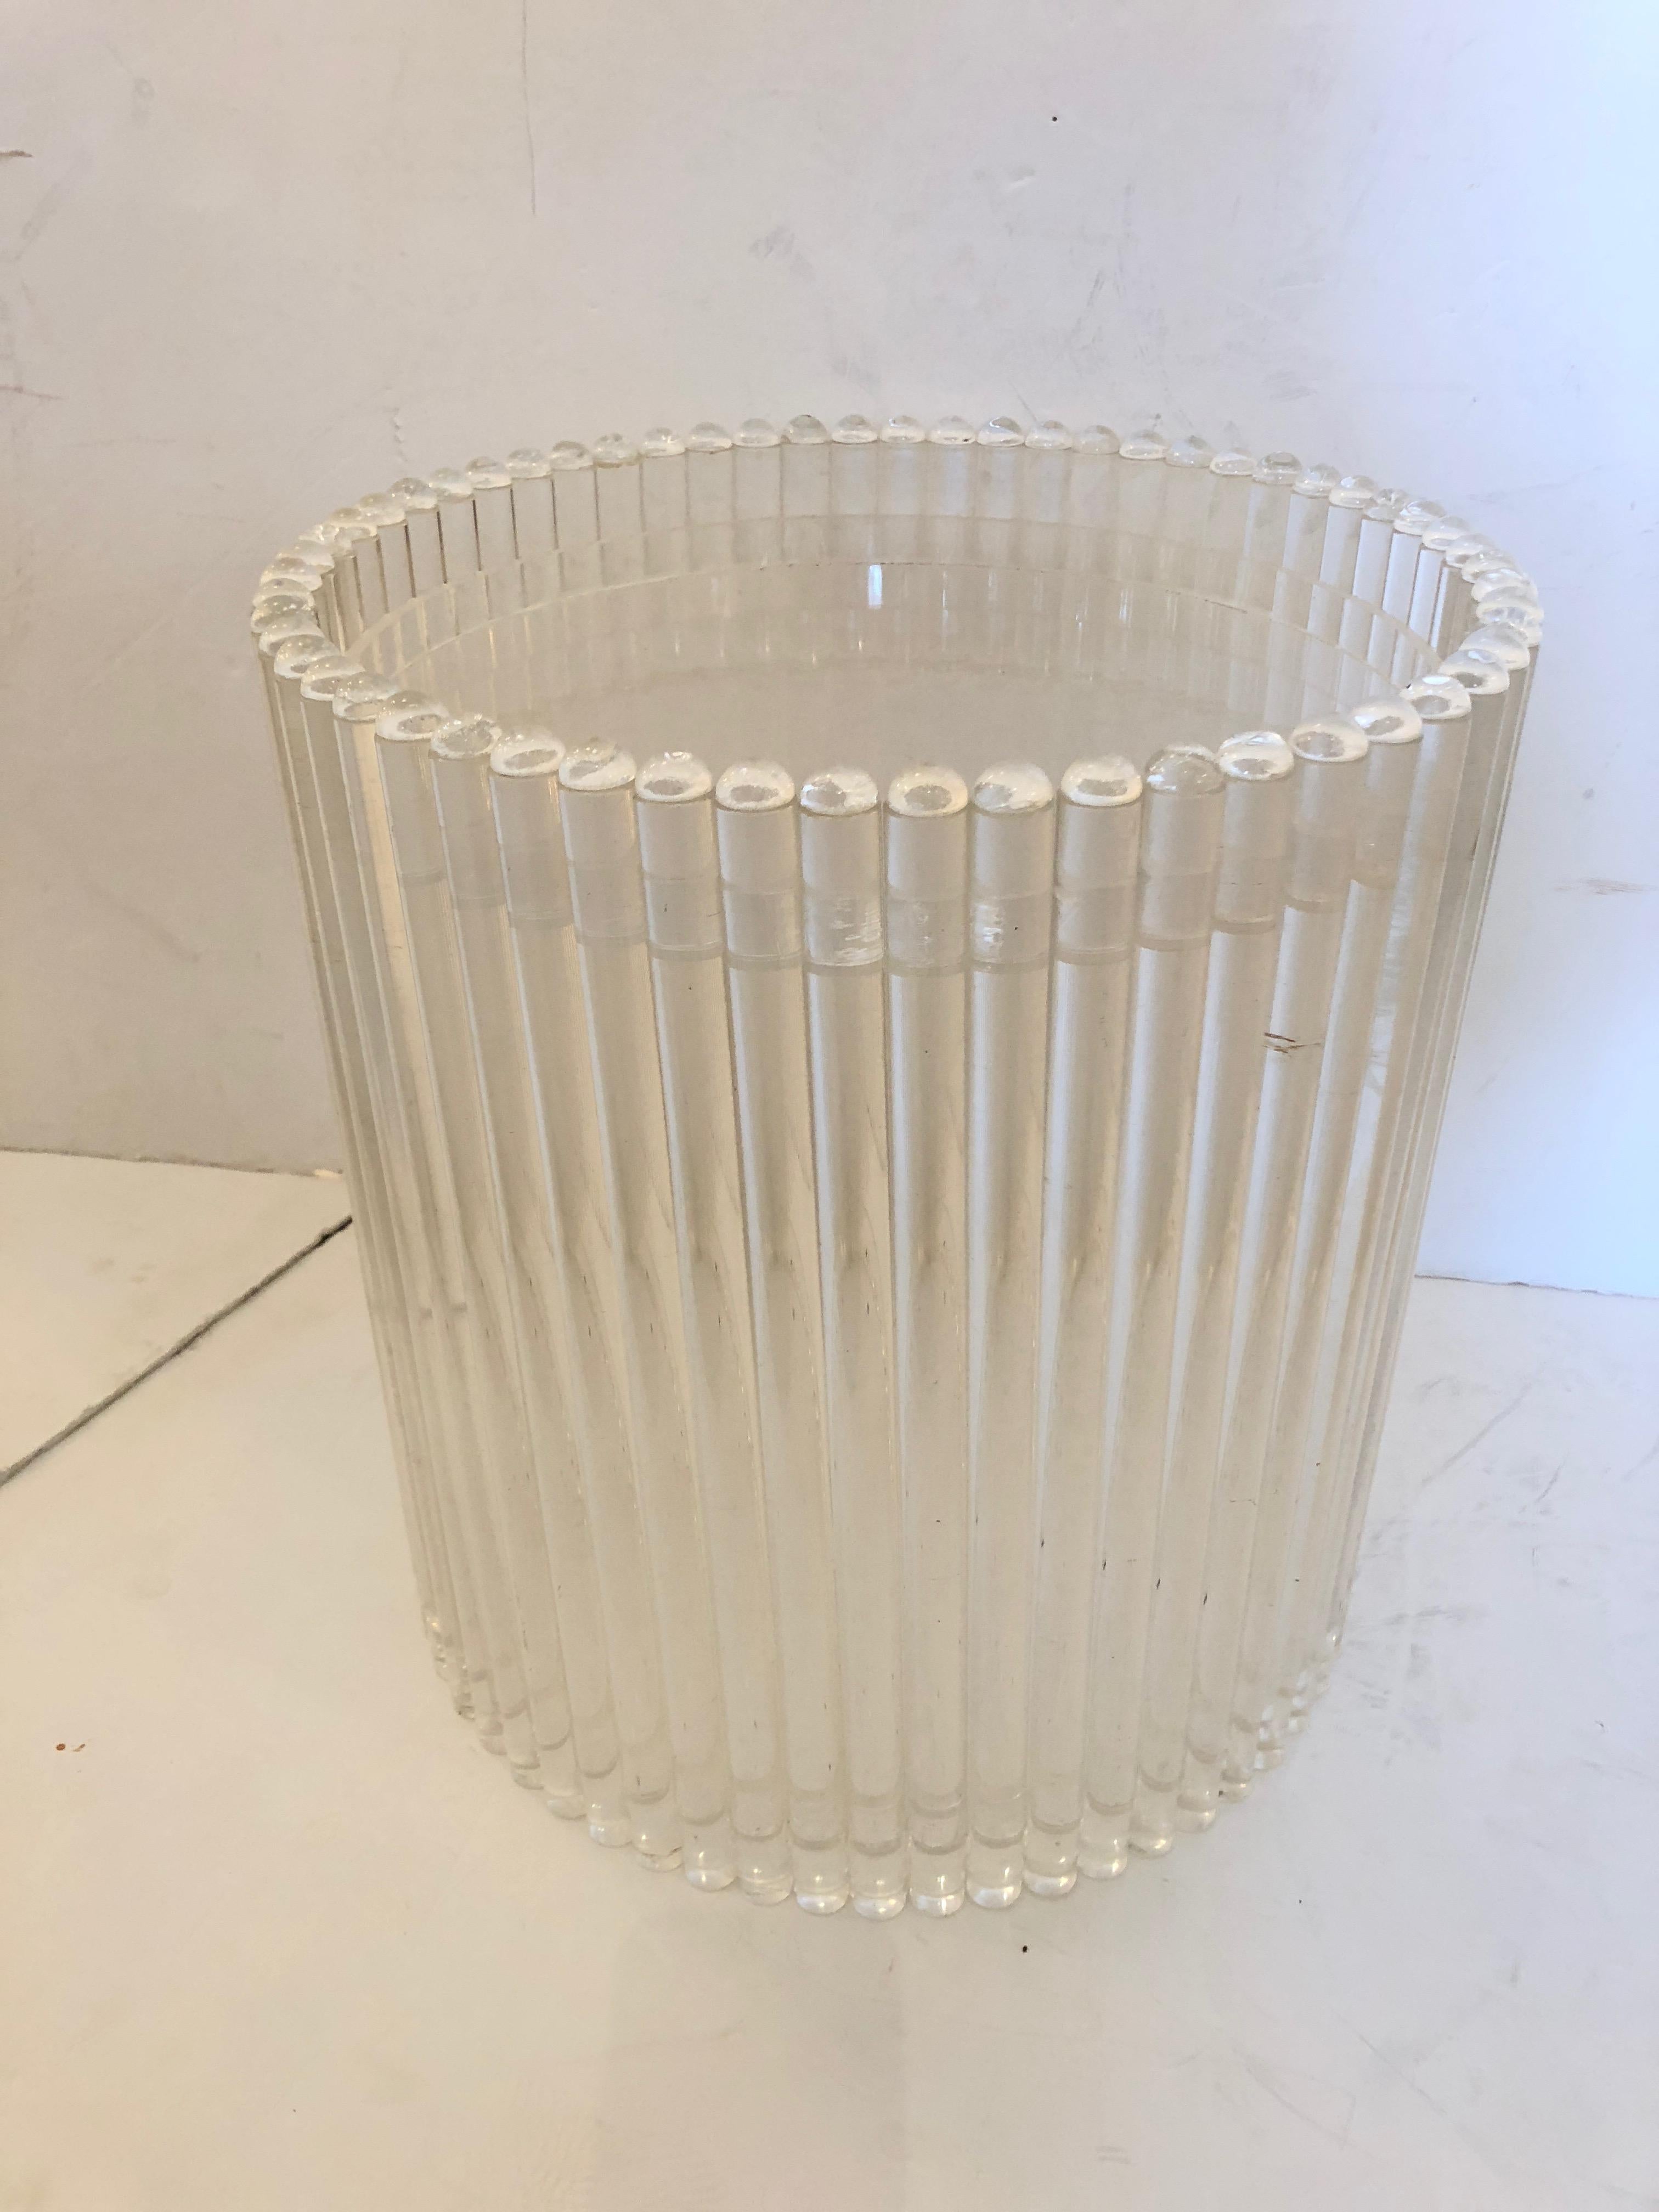 A glamorous Mid-Century Modern drum shaped Lucite end table having solid Lucite rods around the periphery.